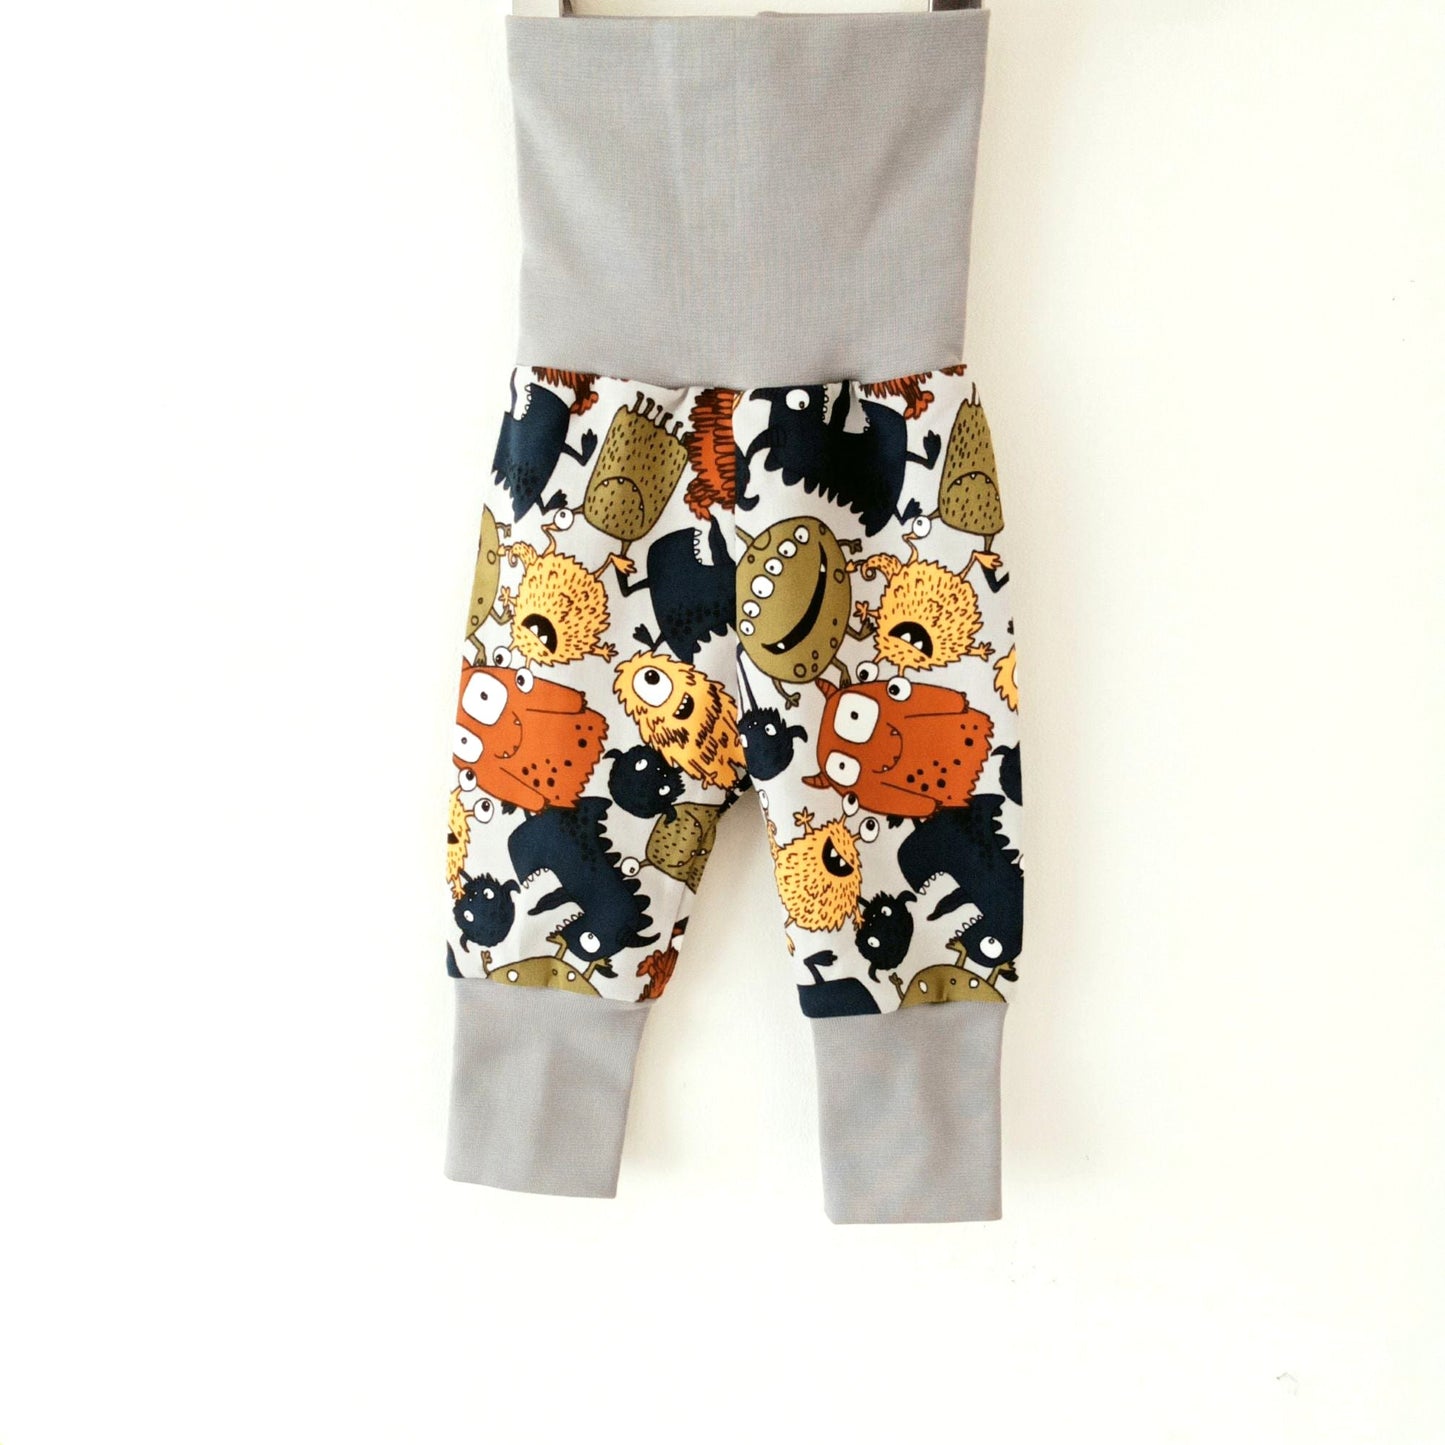 Still life of light grey Khudu Kids baby sweat pants with foldover waistband and ankle cuffs, featuring colourful cartoon monsters and aliens.